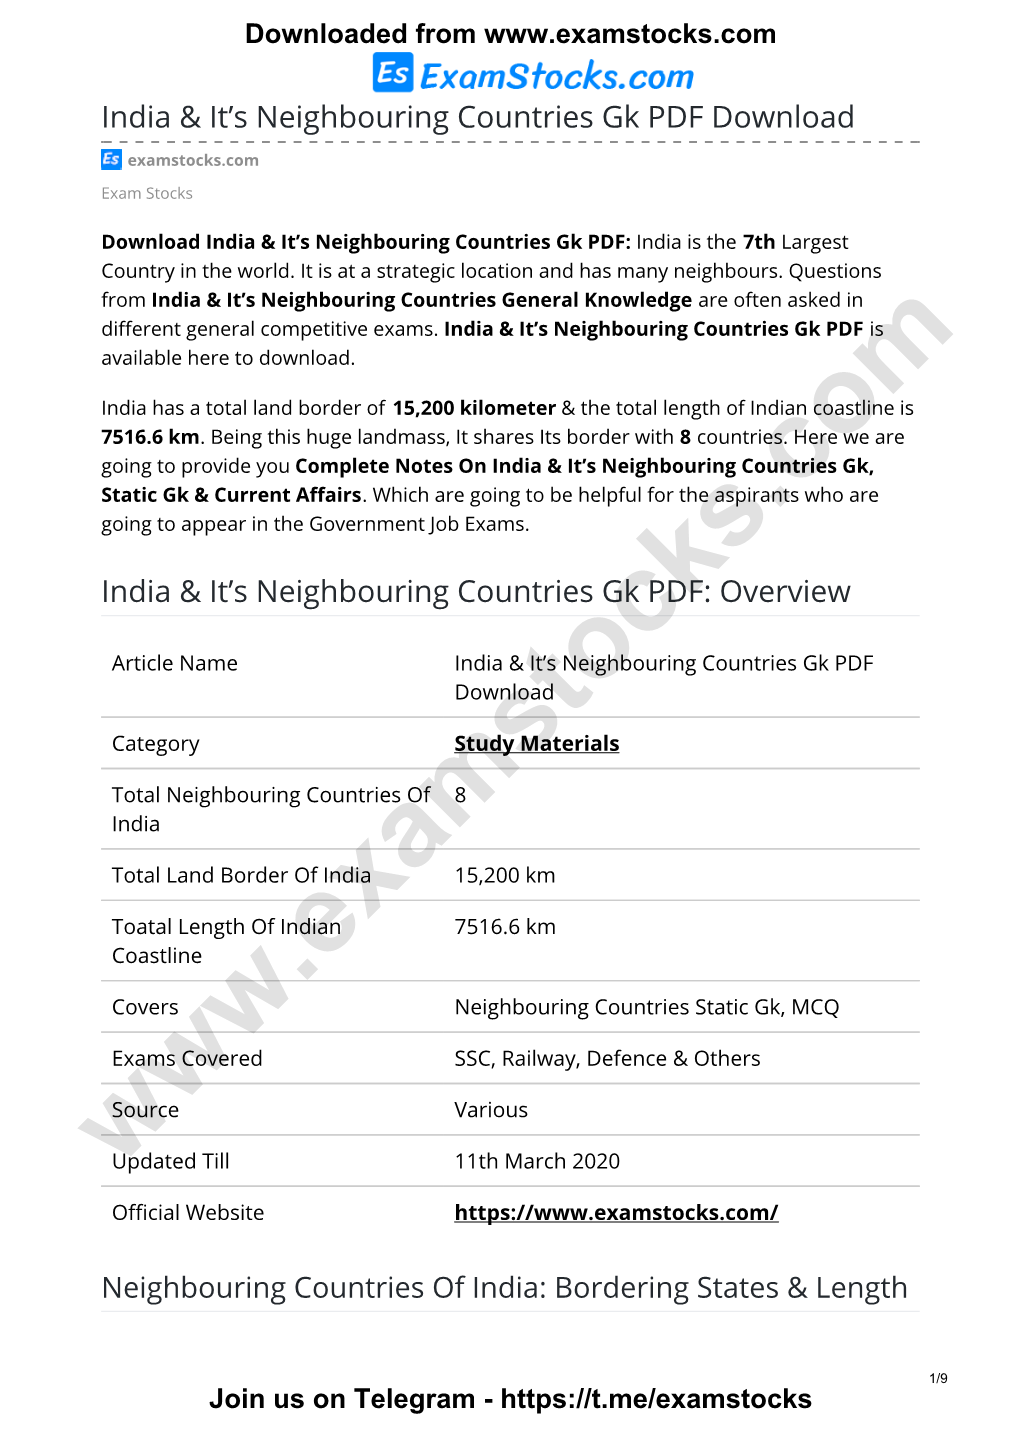 India & It's Neighbouring Countries Gk PDF Download